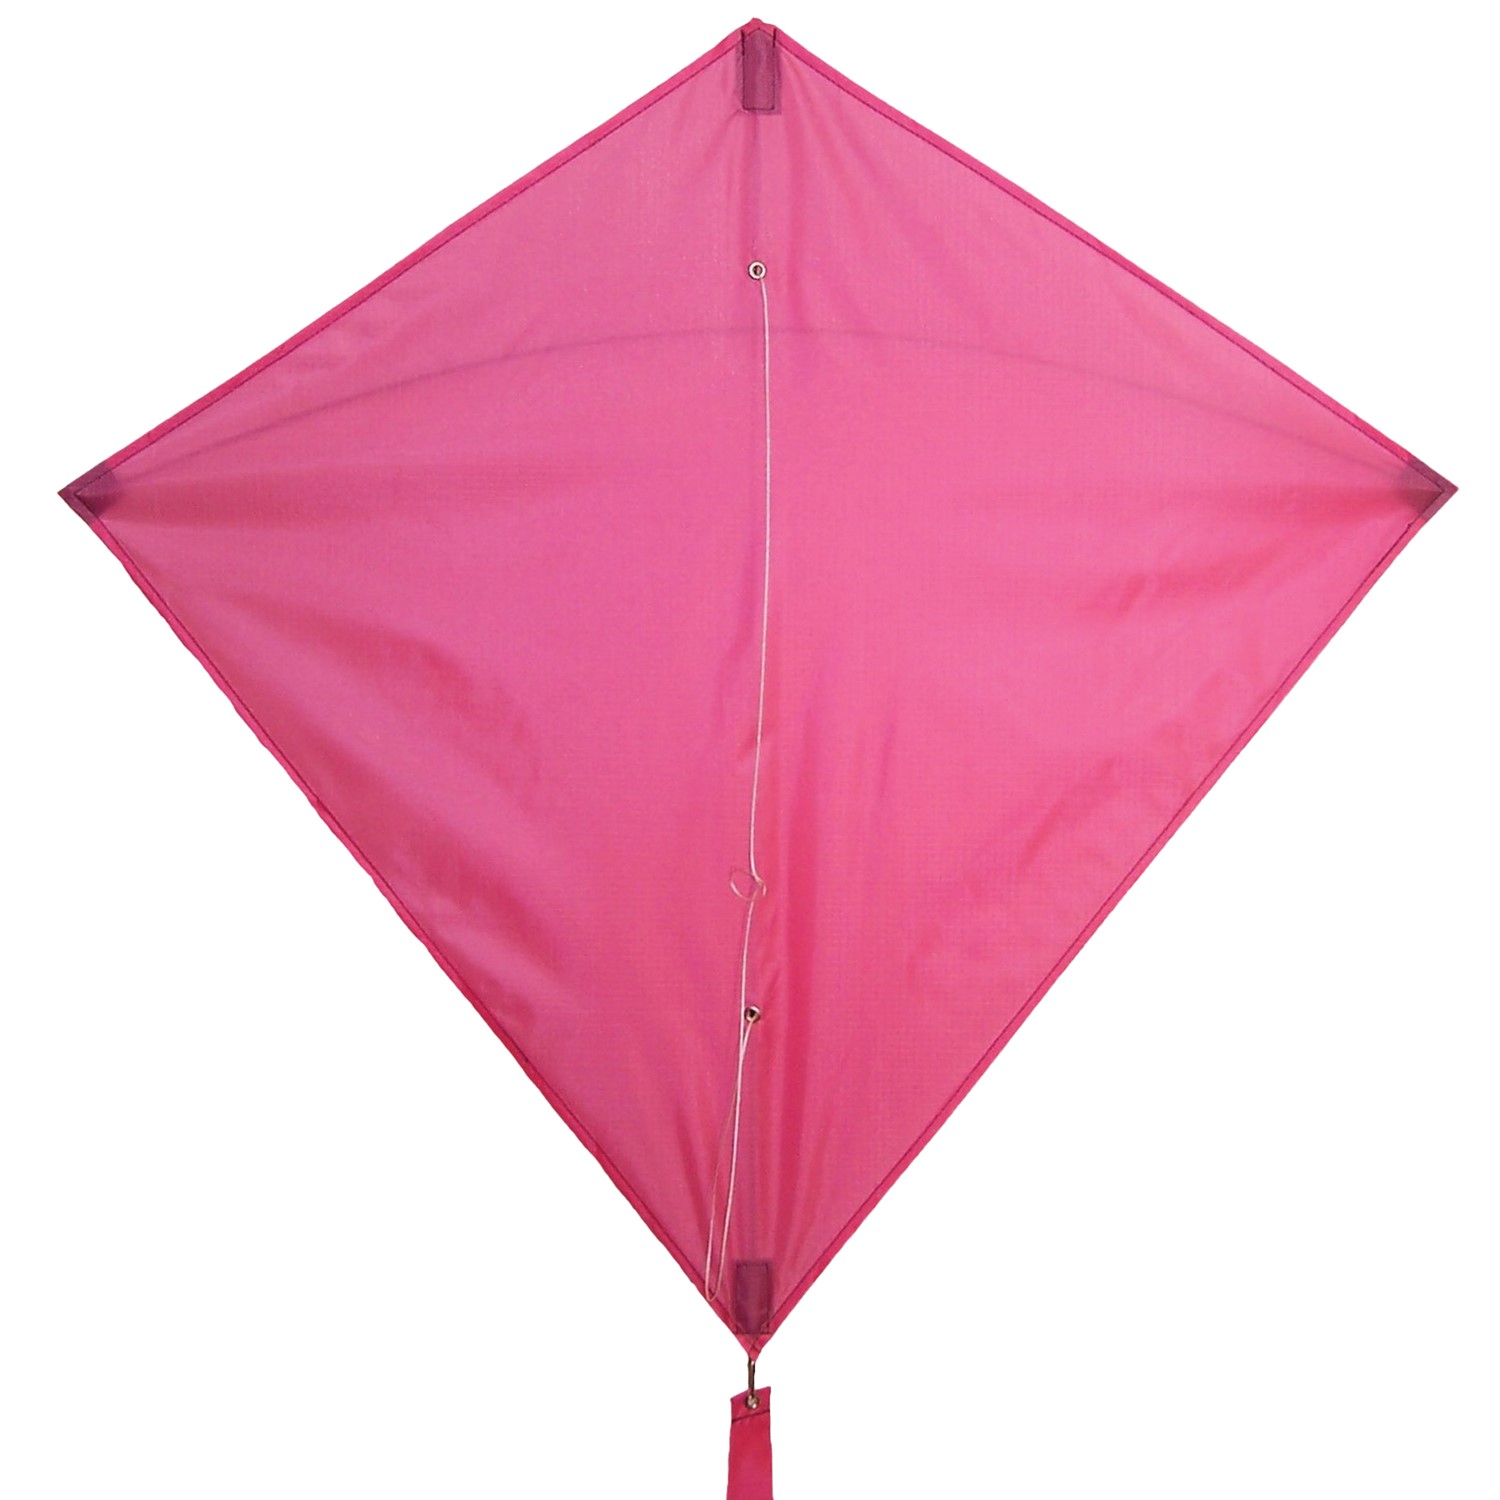 In the Breeze Pink Colorfly 30" Diamond Kite 2994